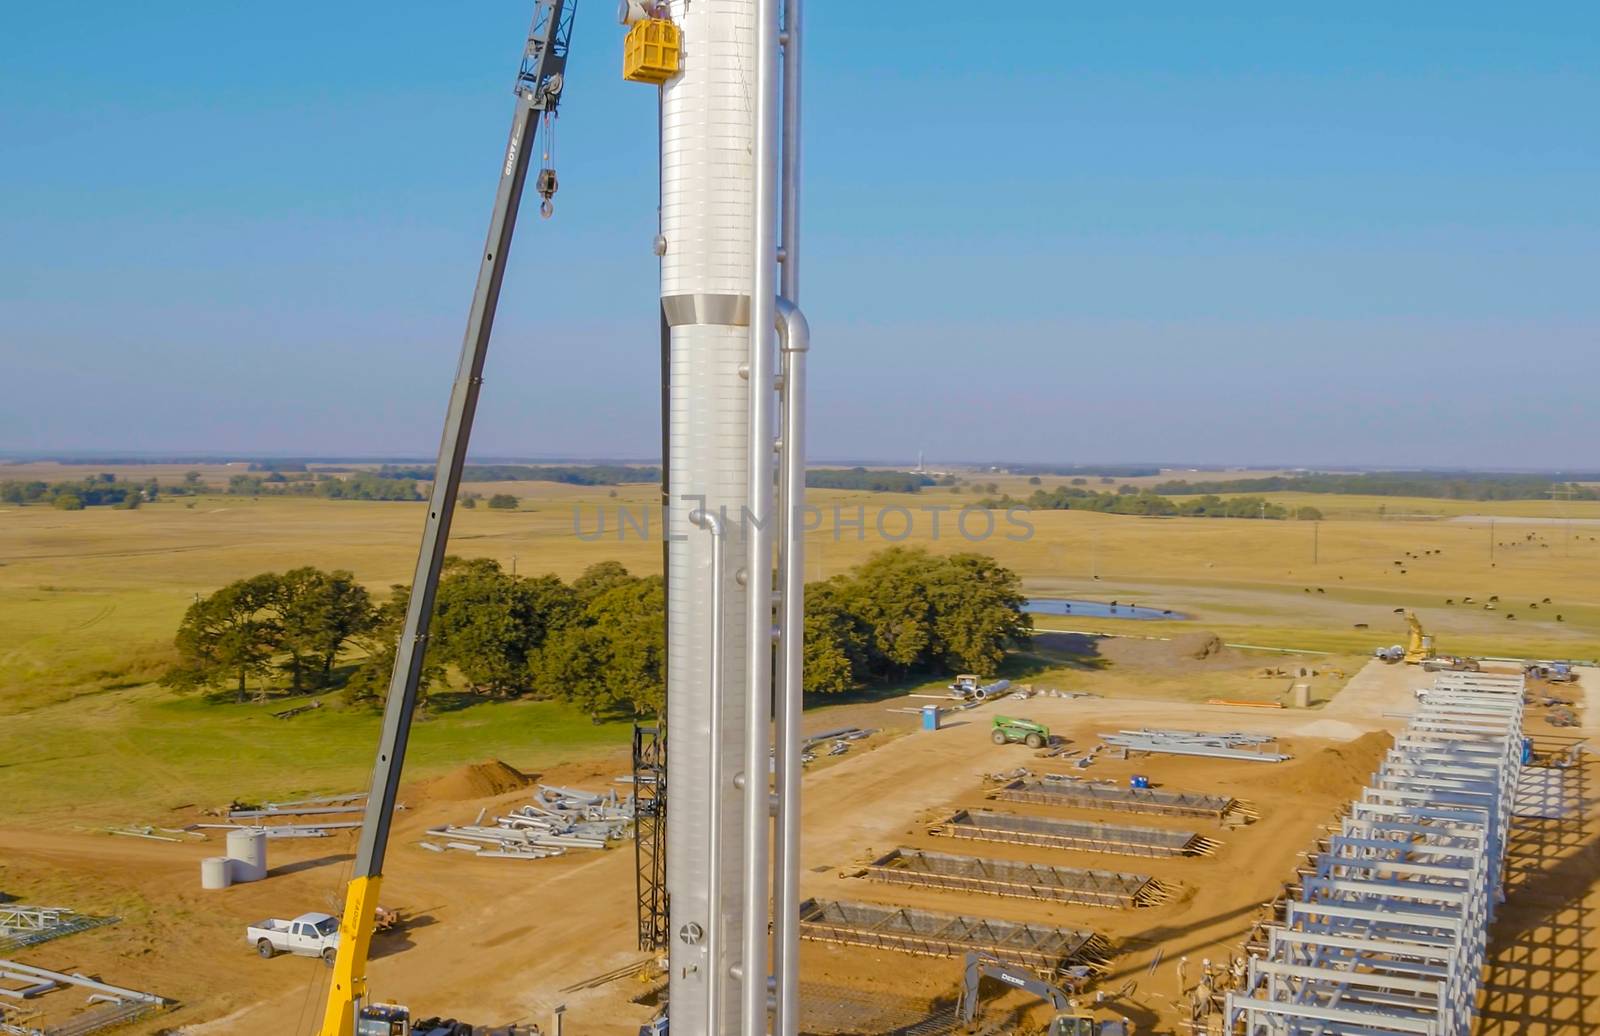 Installation of the distillation column with a lift crane. Construction of an oil refinery.